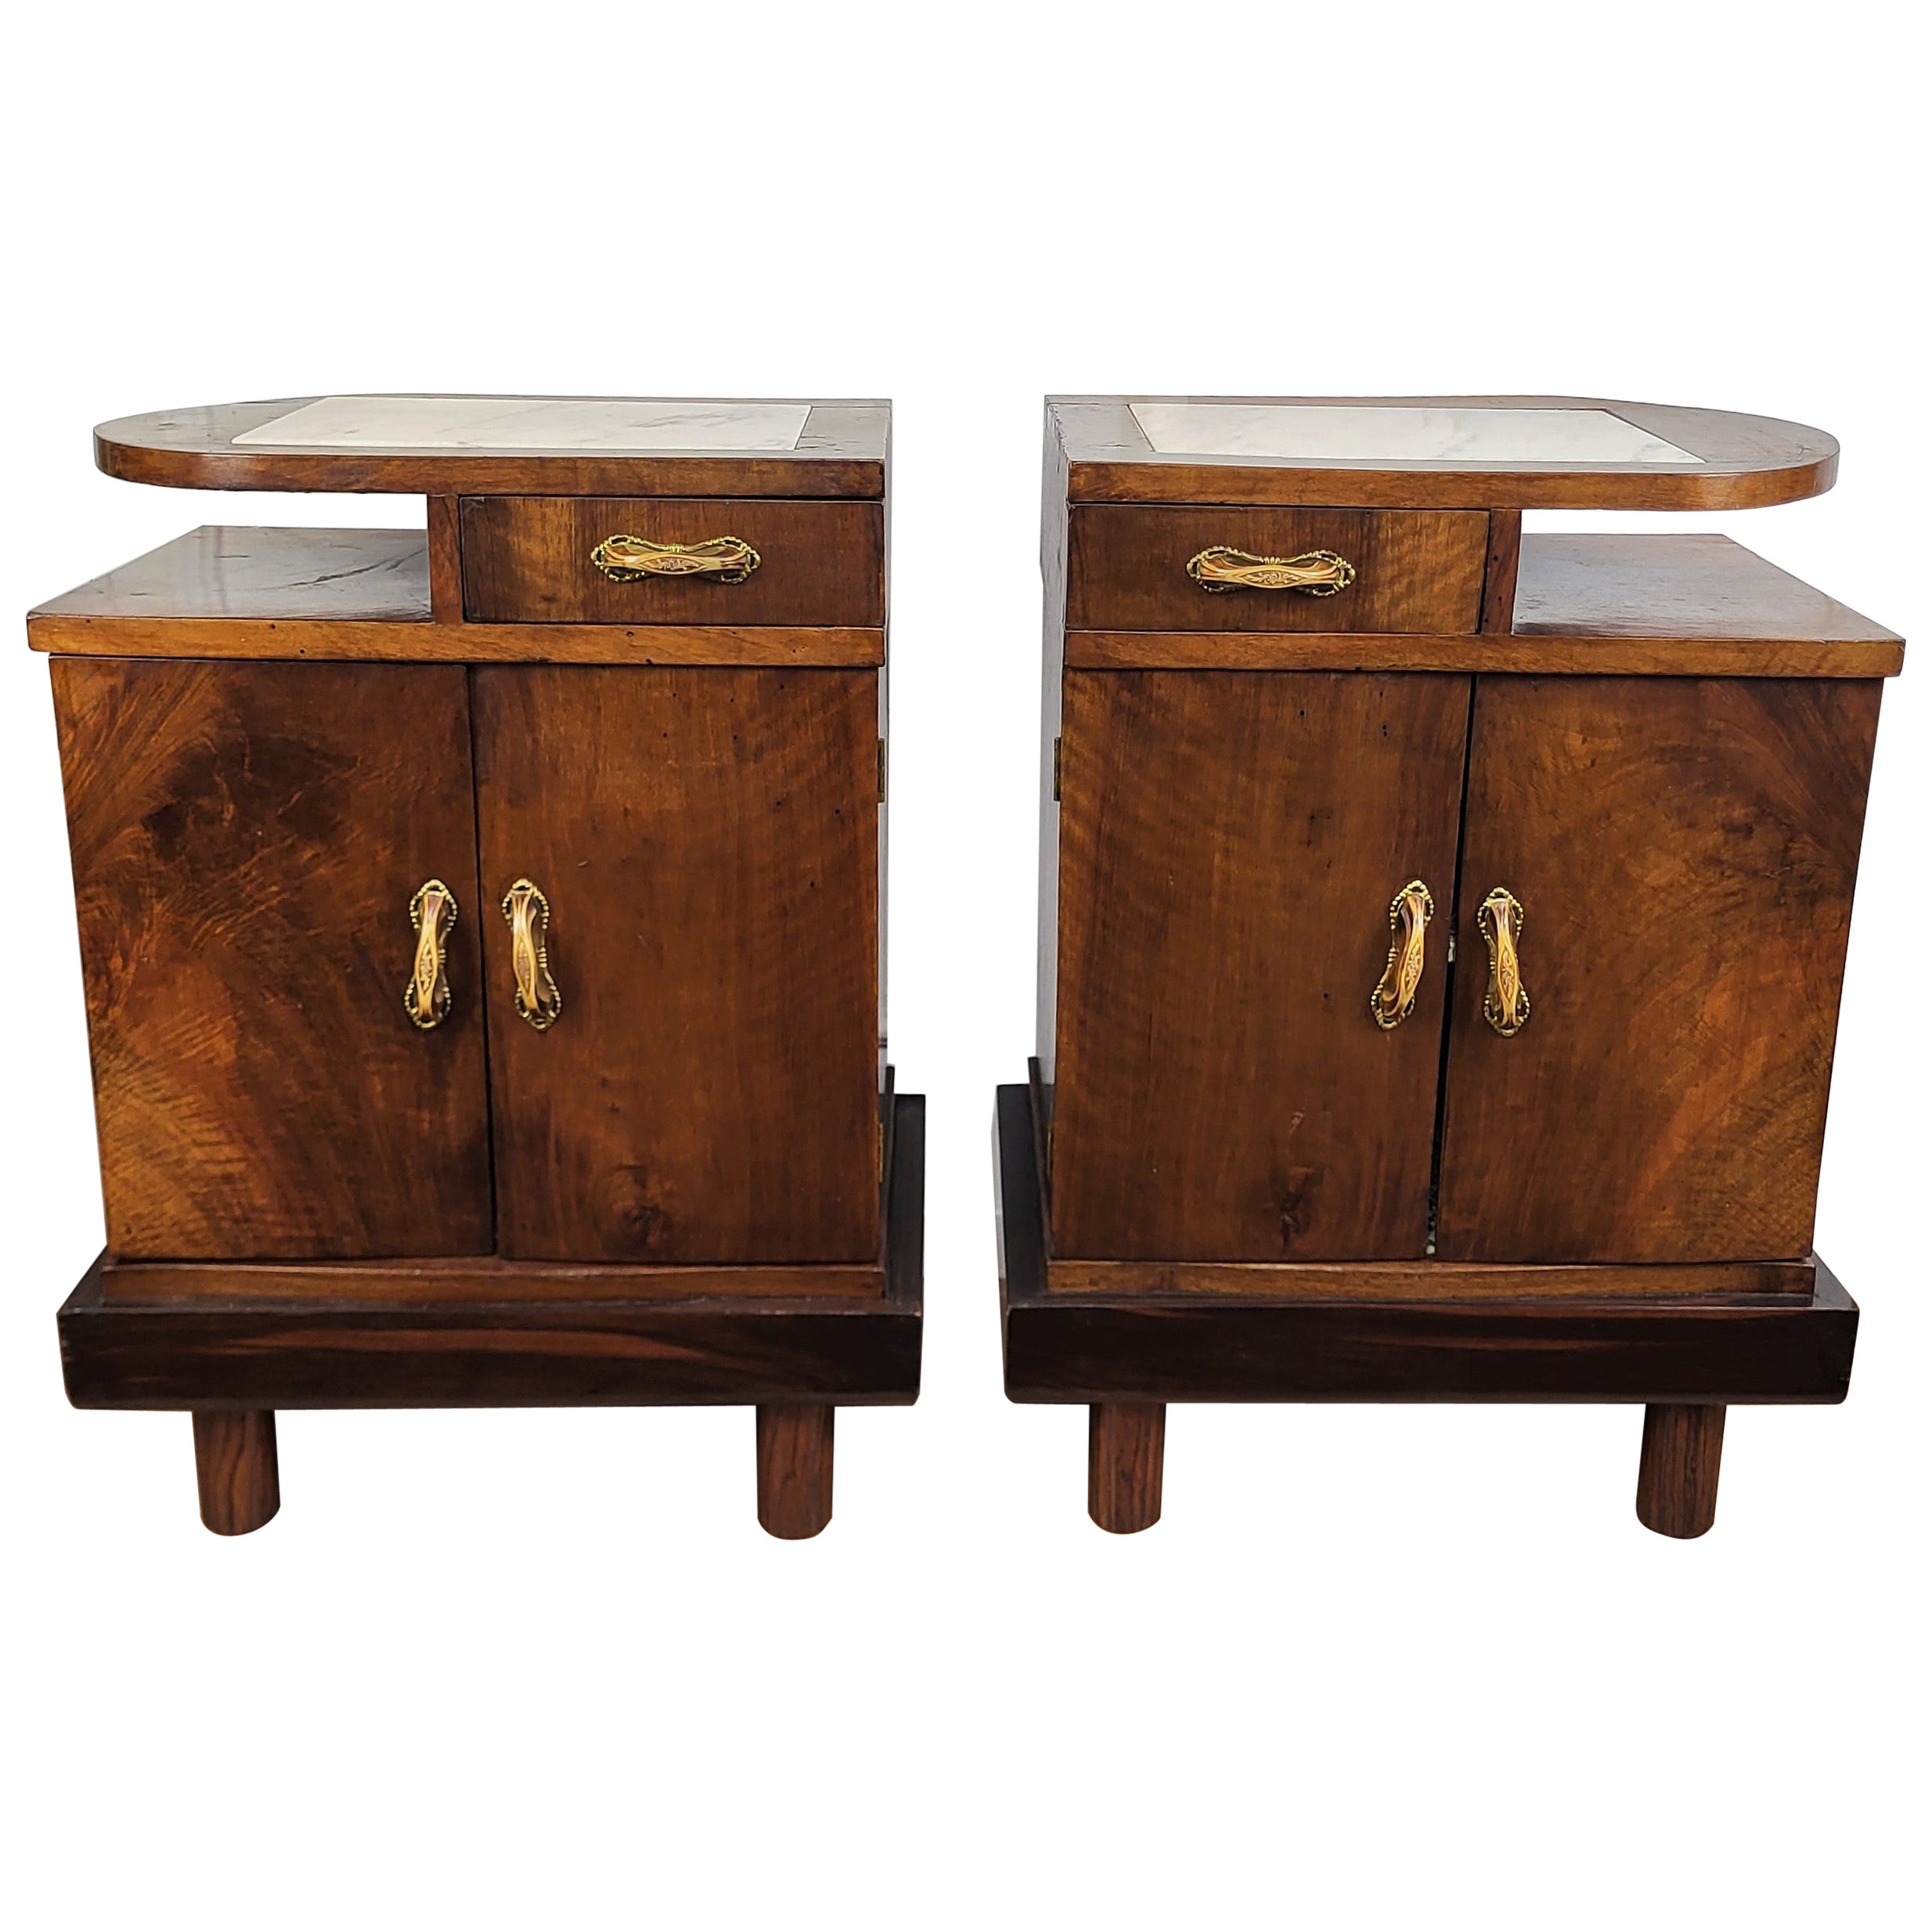 Pair of Italian Art Deco Nightstand bedside Tables in Burl Walnut and Marble Top